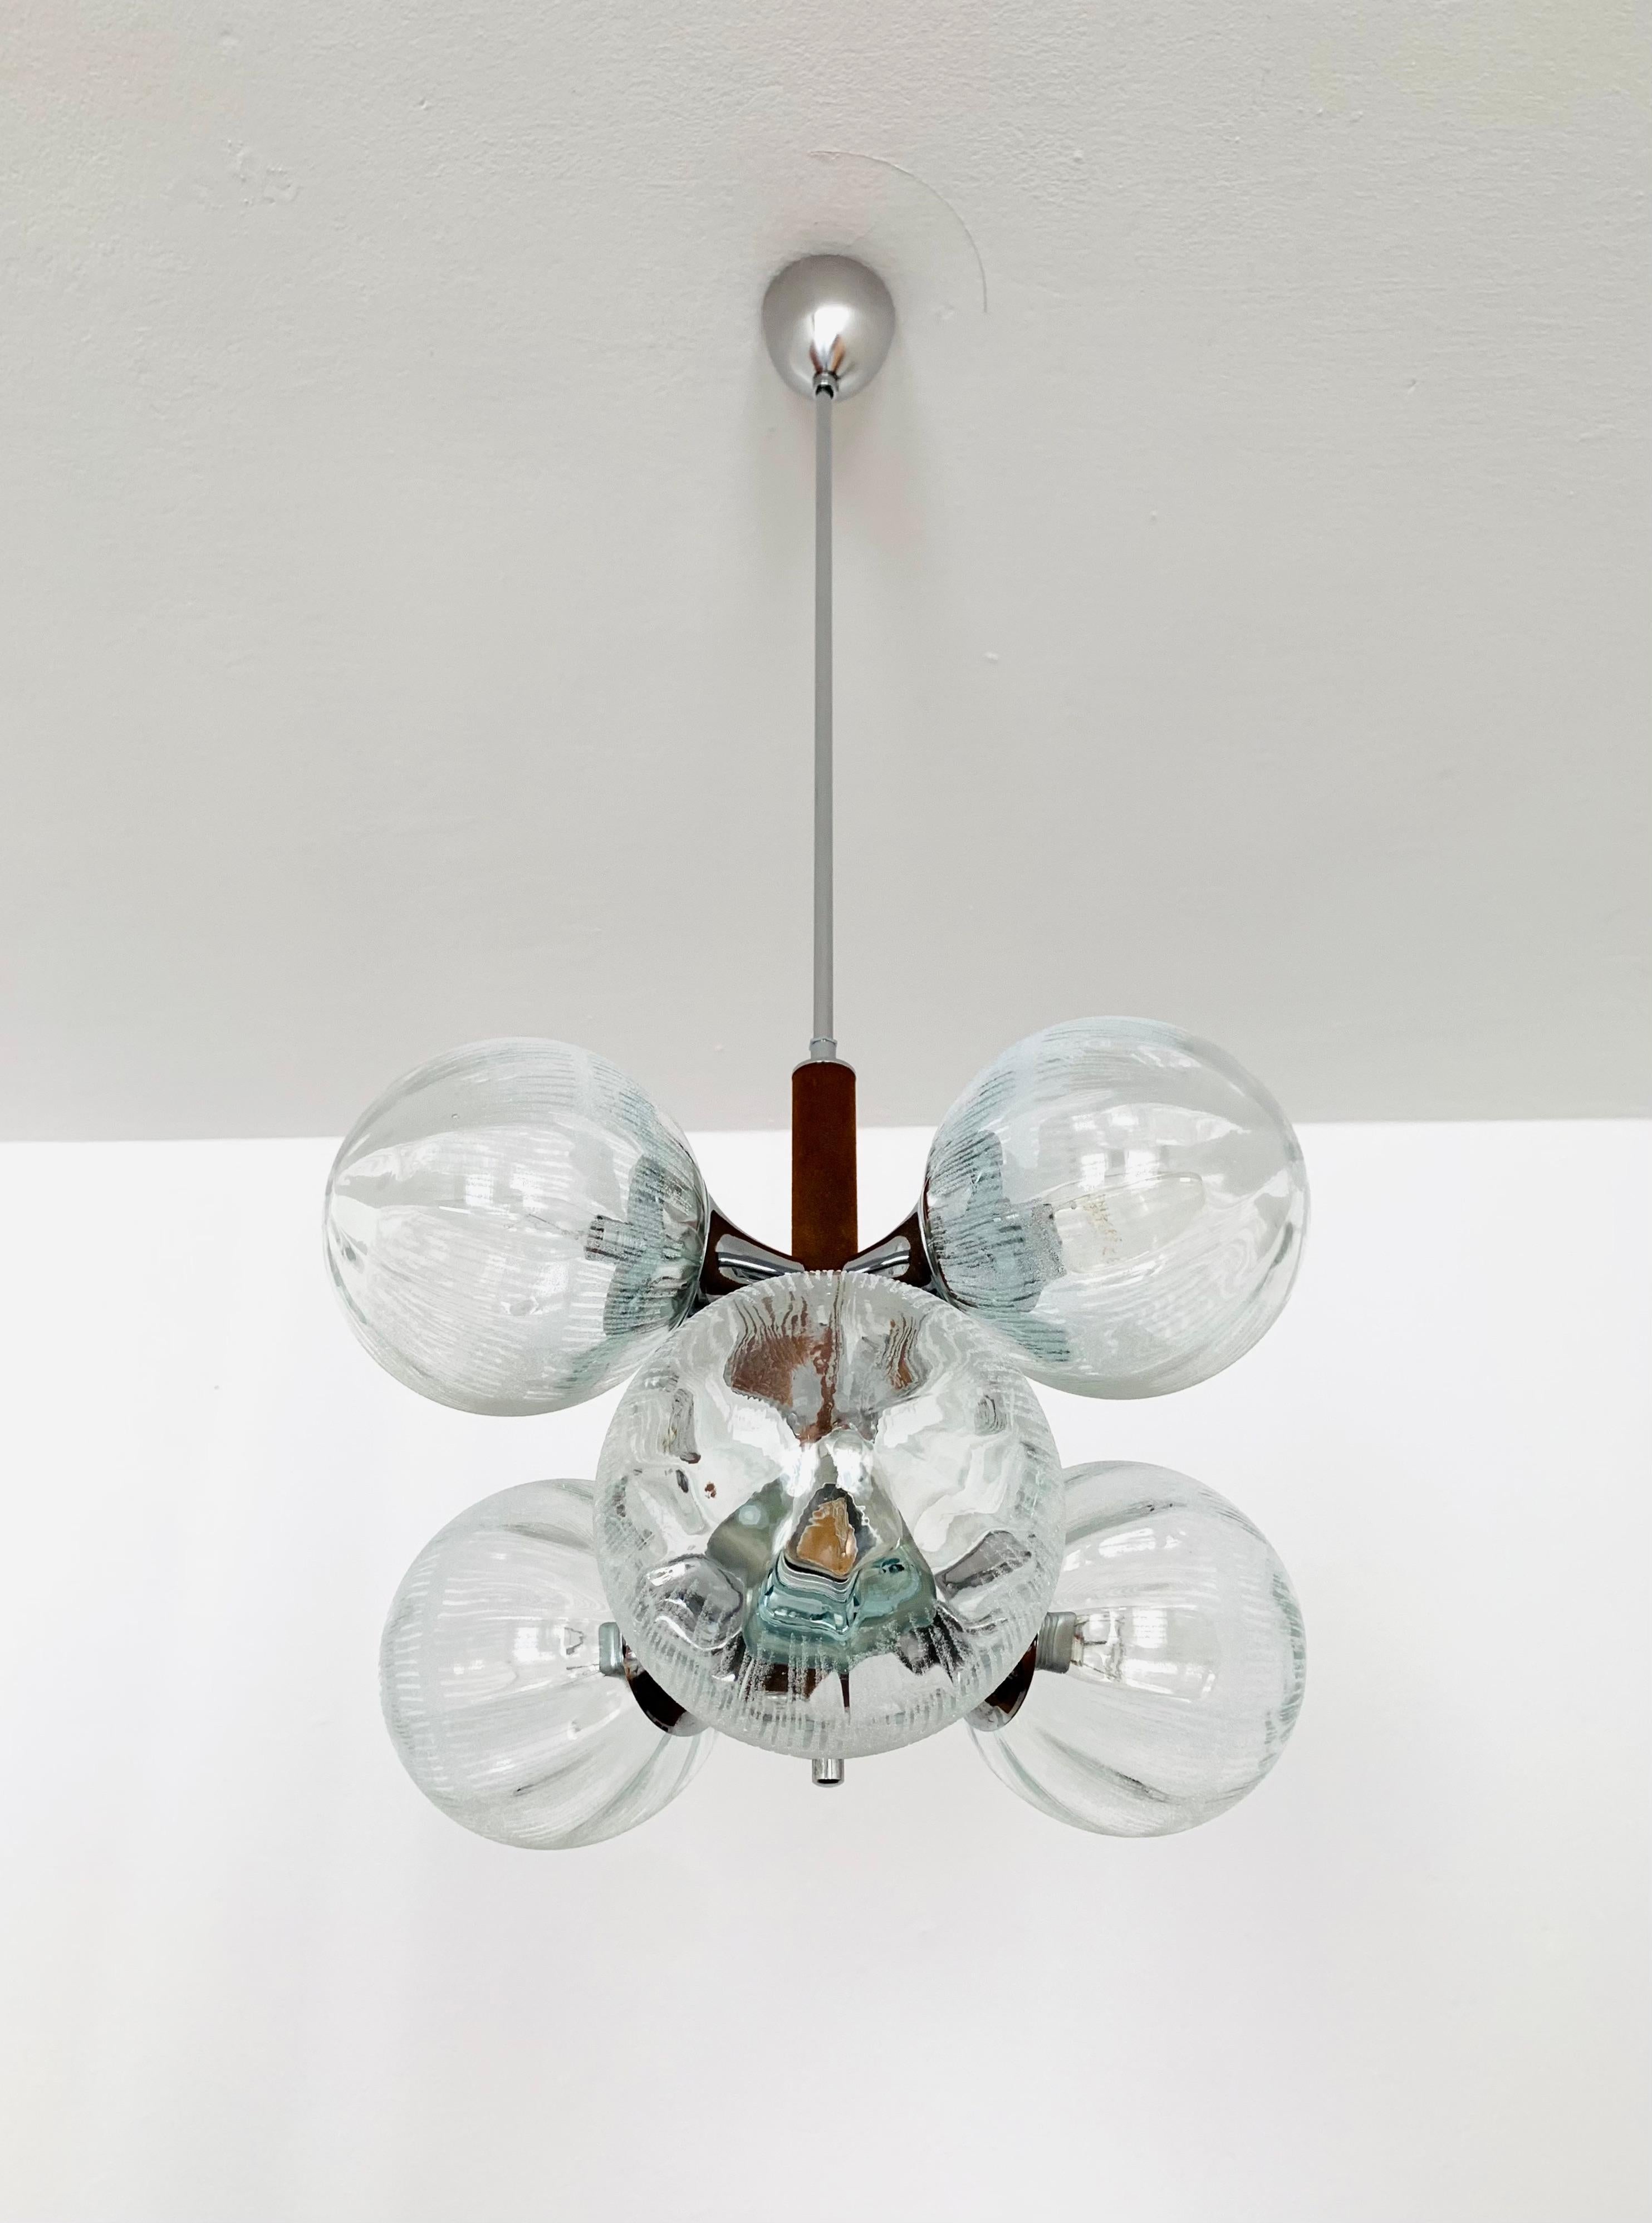 Wonderful Sputnik chandelier from the 1960s.
The 6 crystal glass lampshades have an etched pattern and a special structure in the glass.
The lamp has a very high quality finish.
Very contemporary design with a fantastic look.
A spectacular play